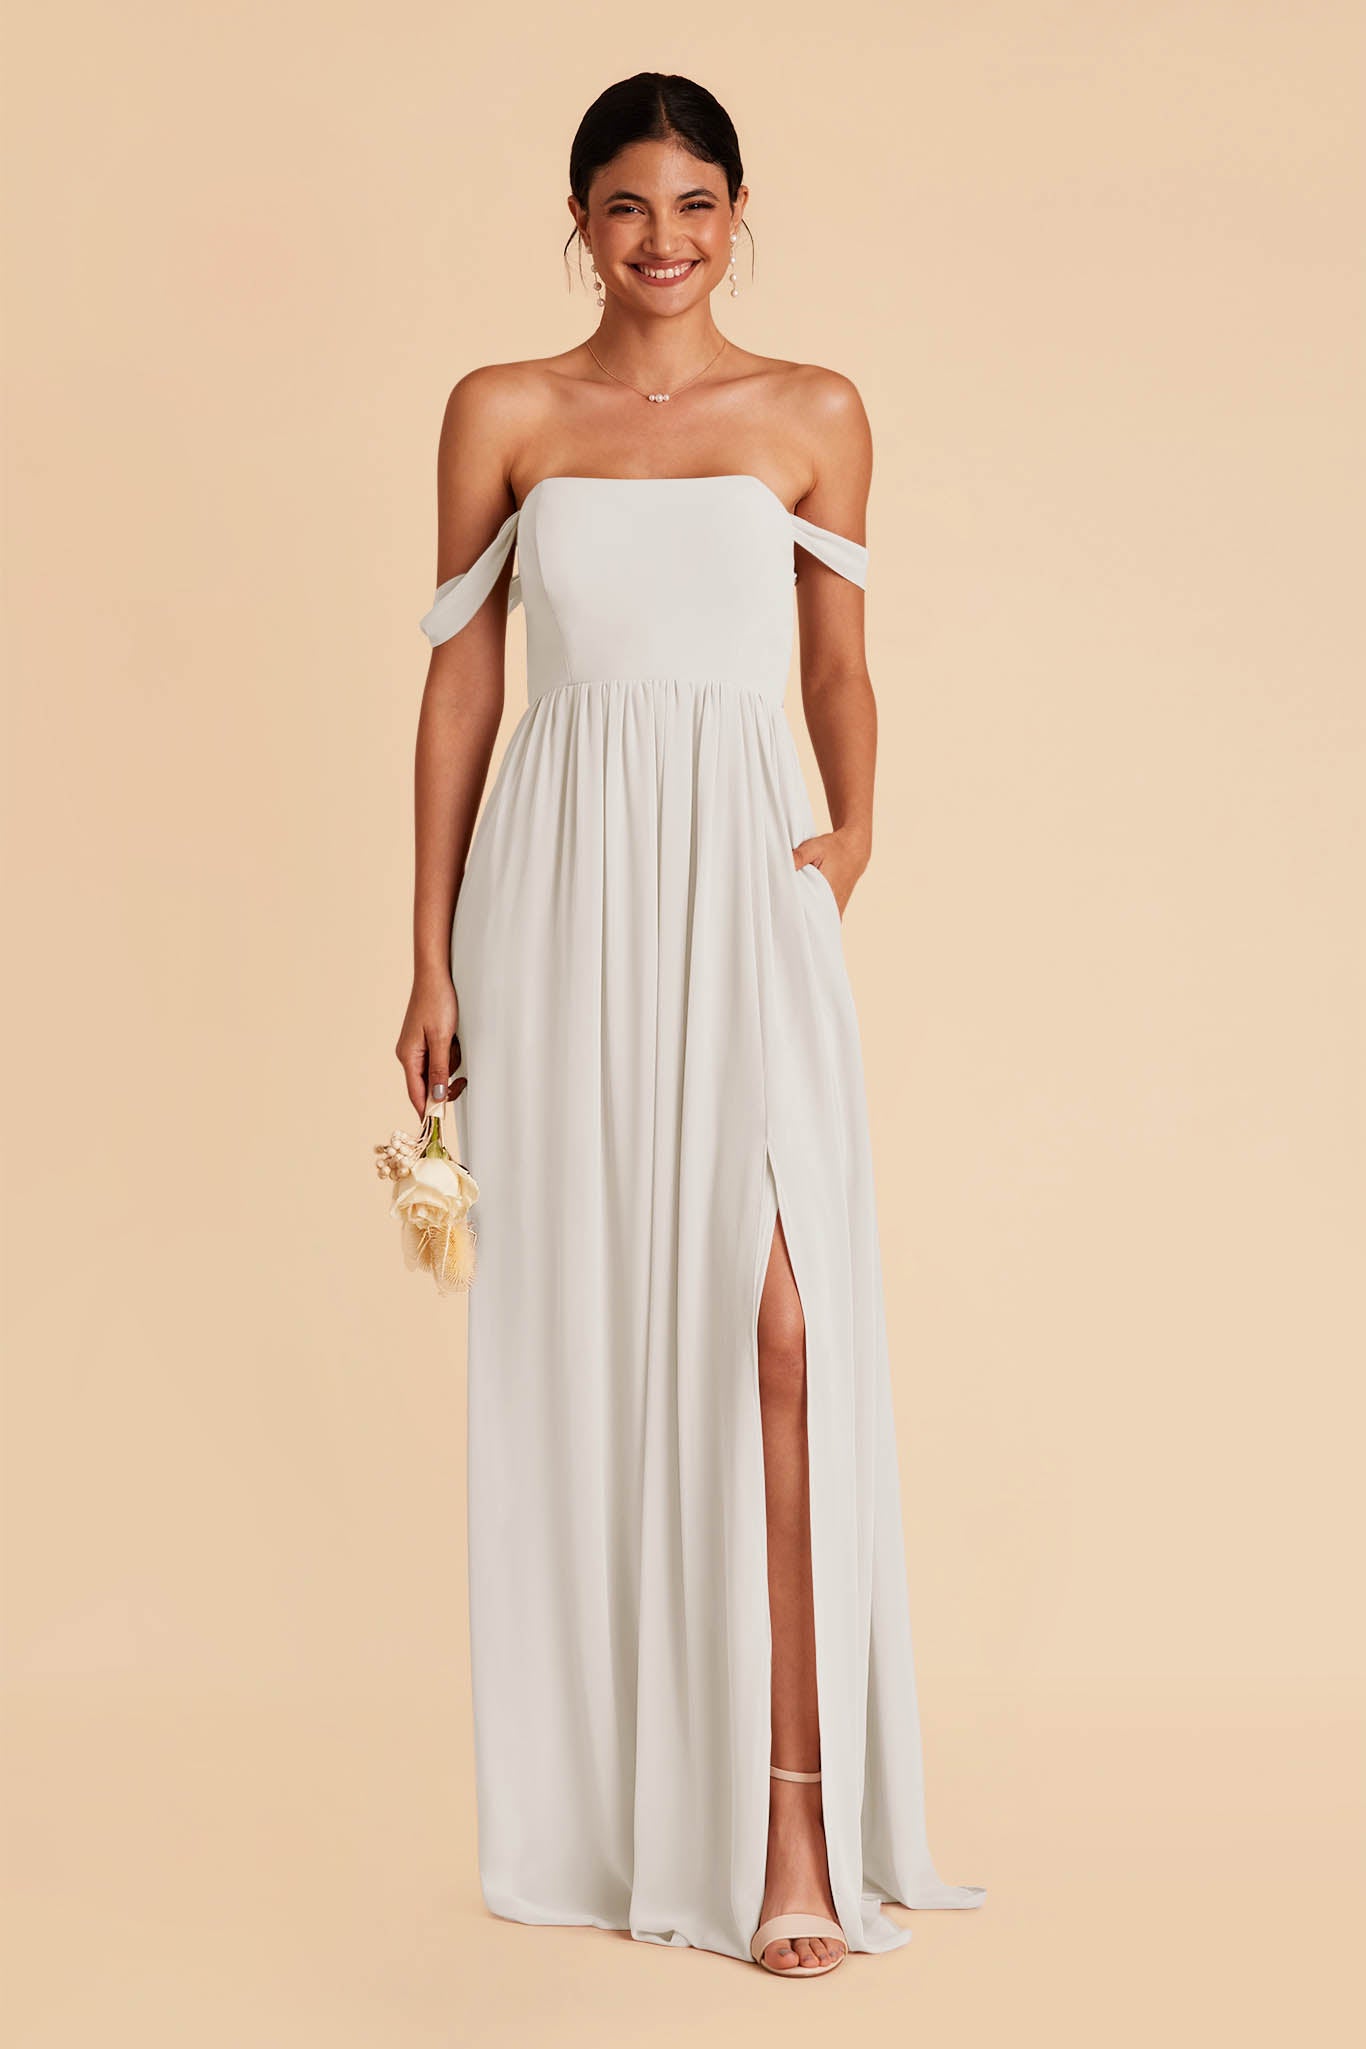 Dove Gray August Convertible Dress by Birdy Grey